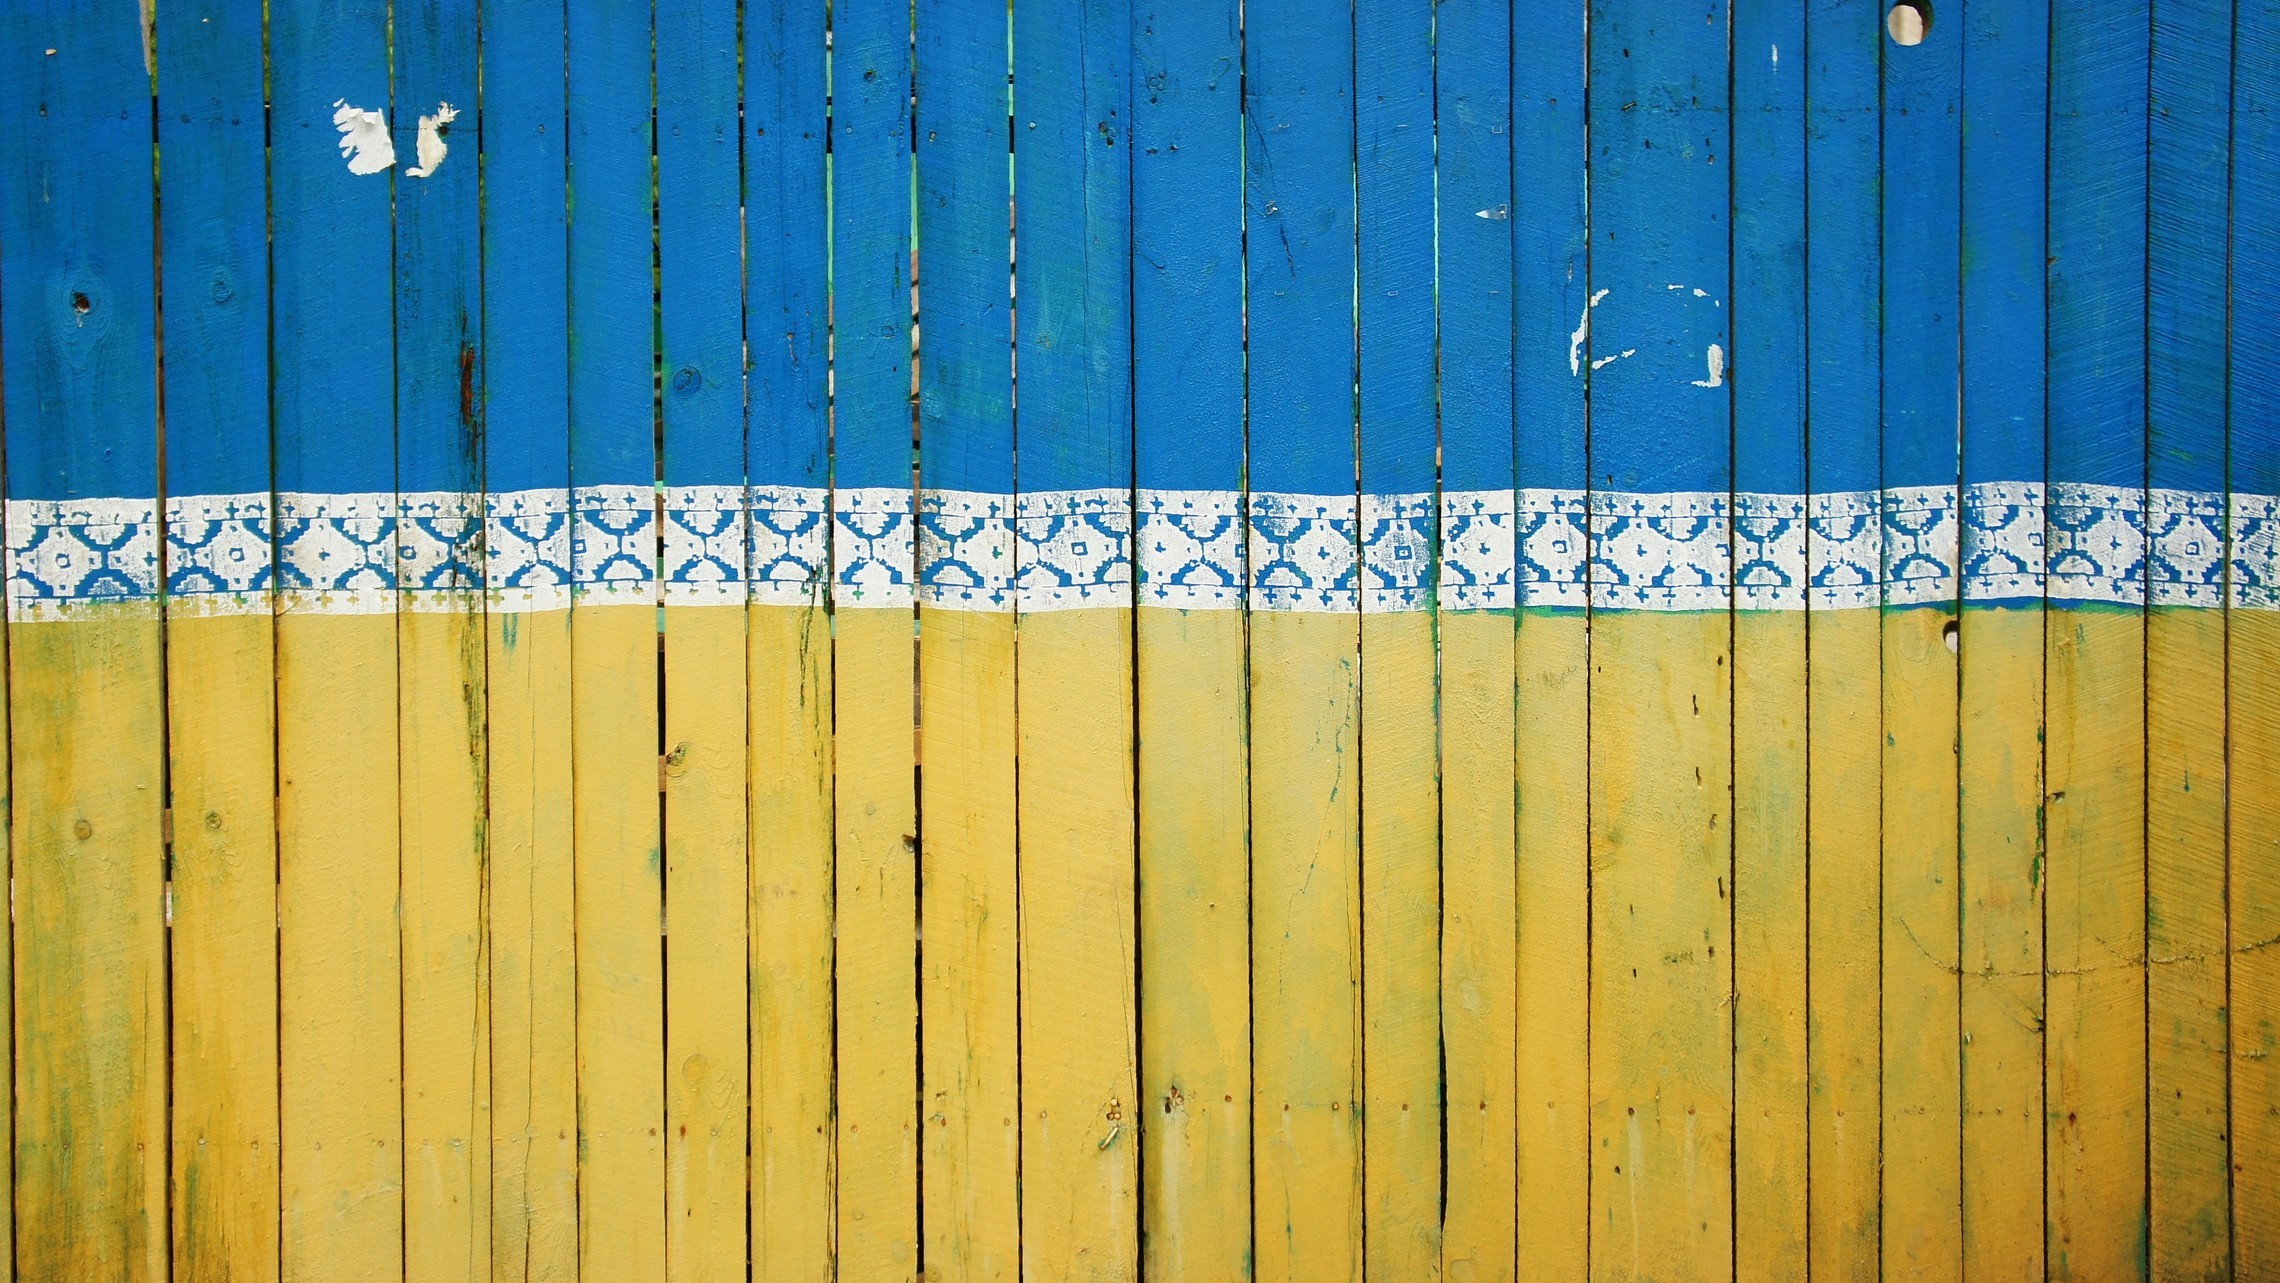 wooden fence painted in the Ukrainian flag colors